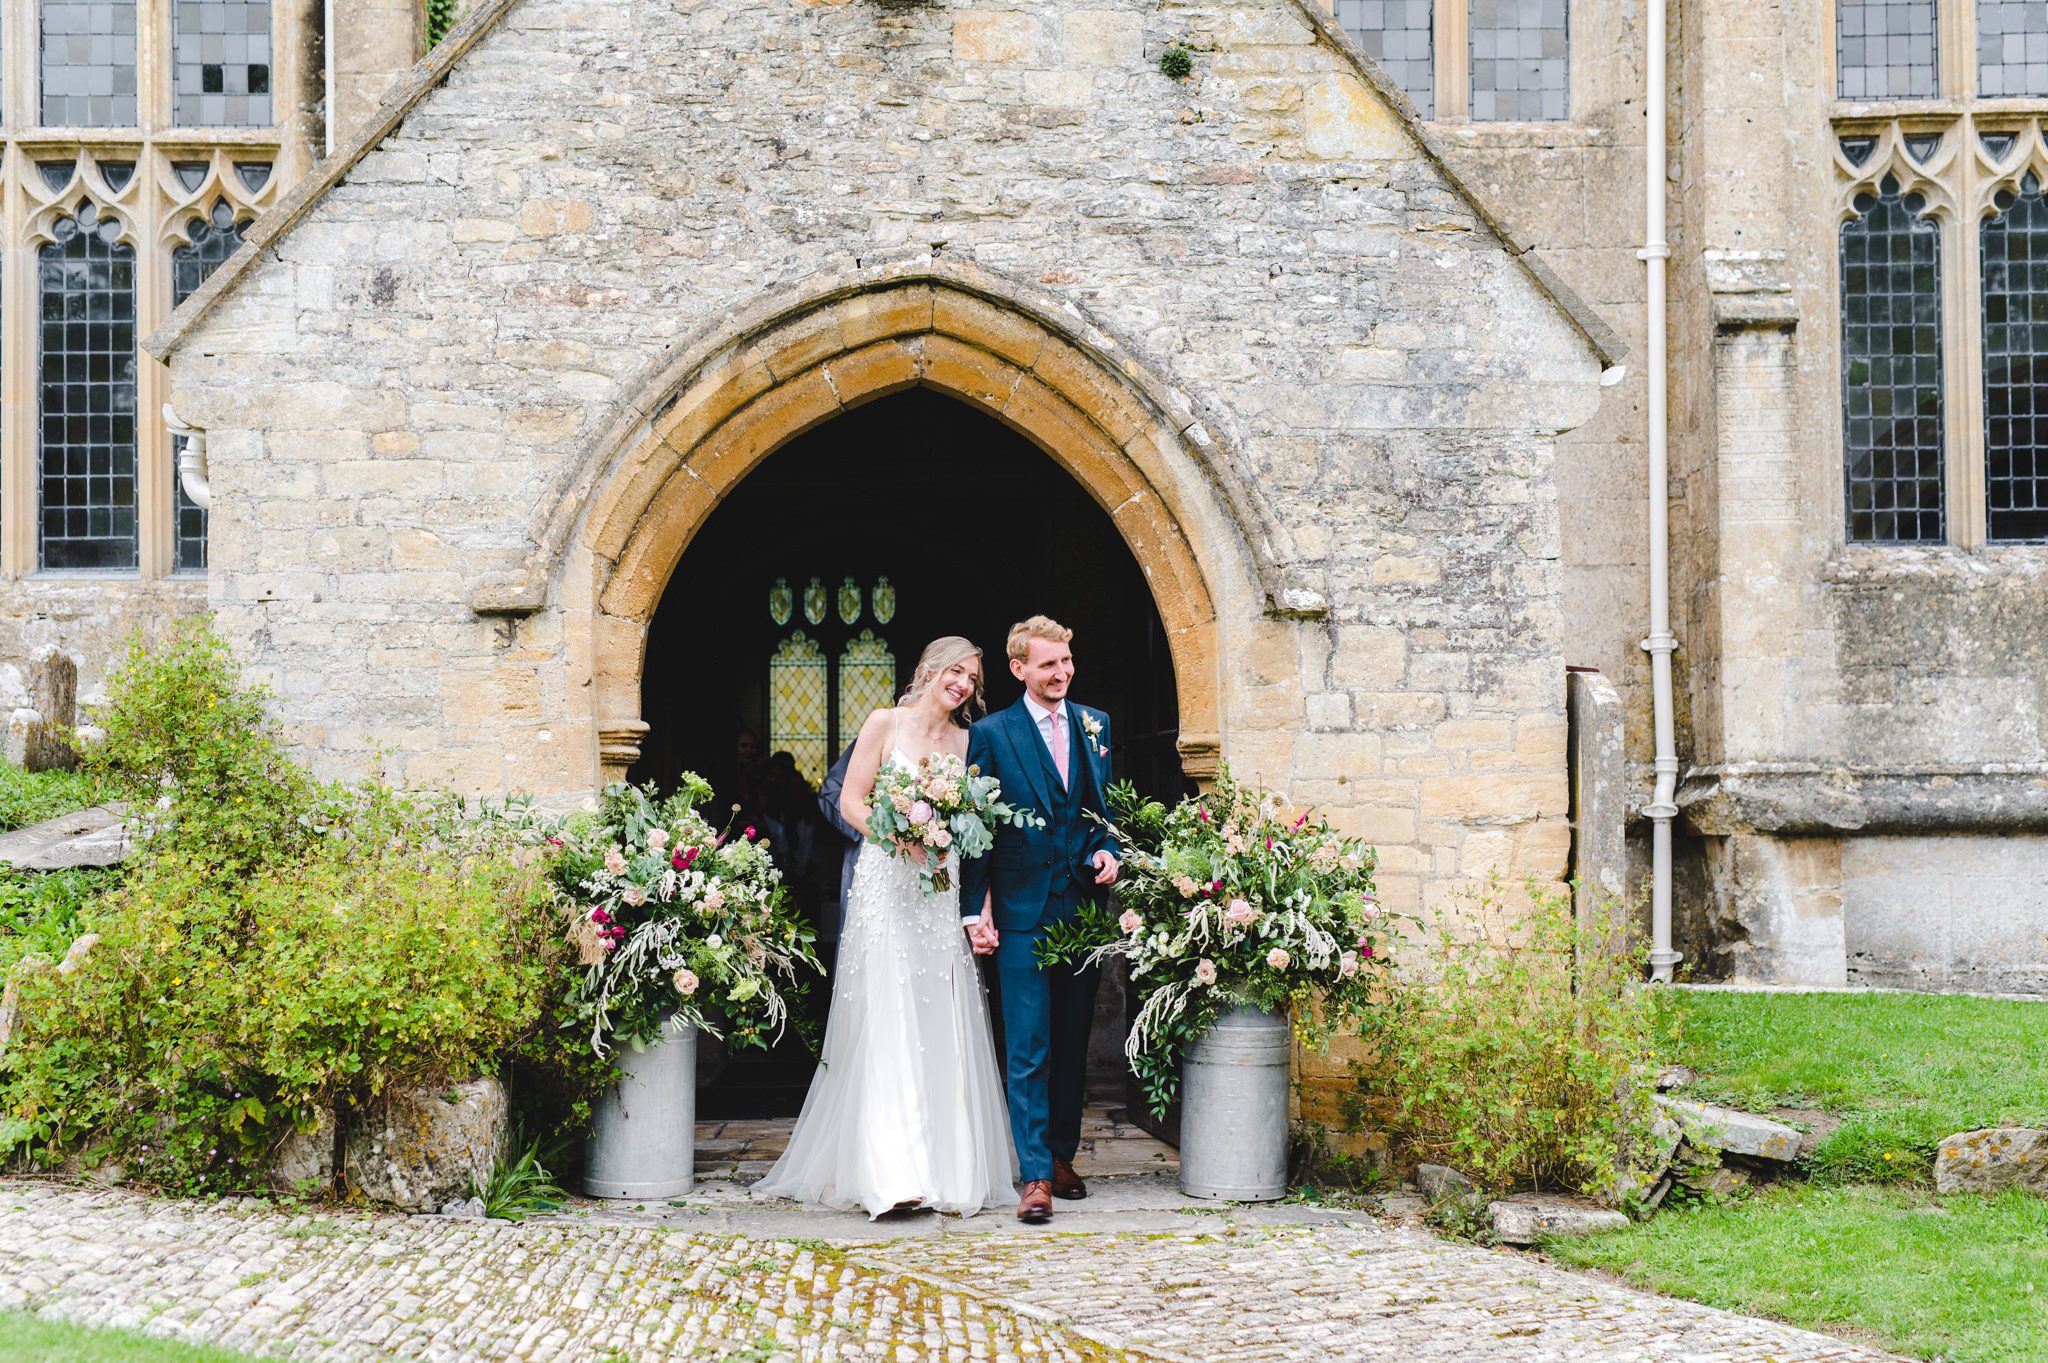 Bride and groom exiting Chedworth Church by Bigeye Photography